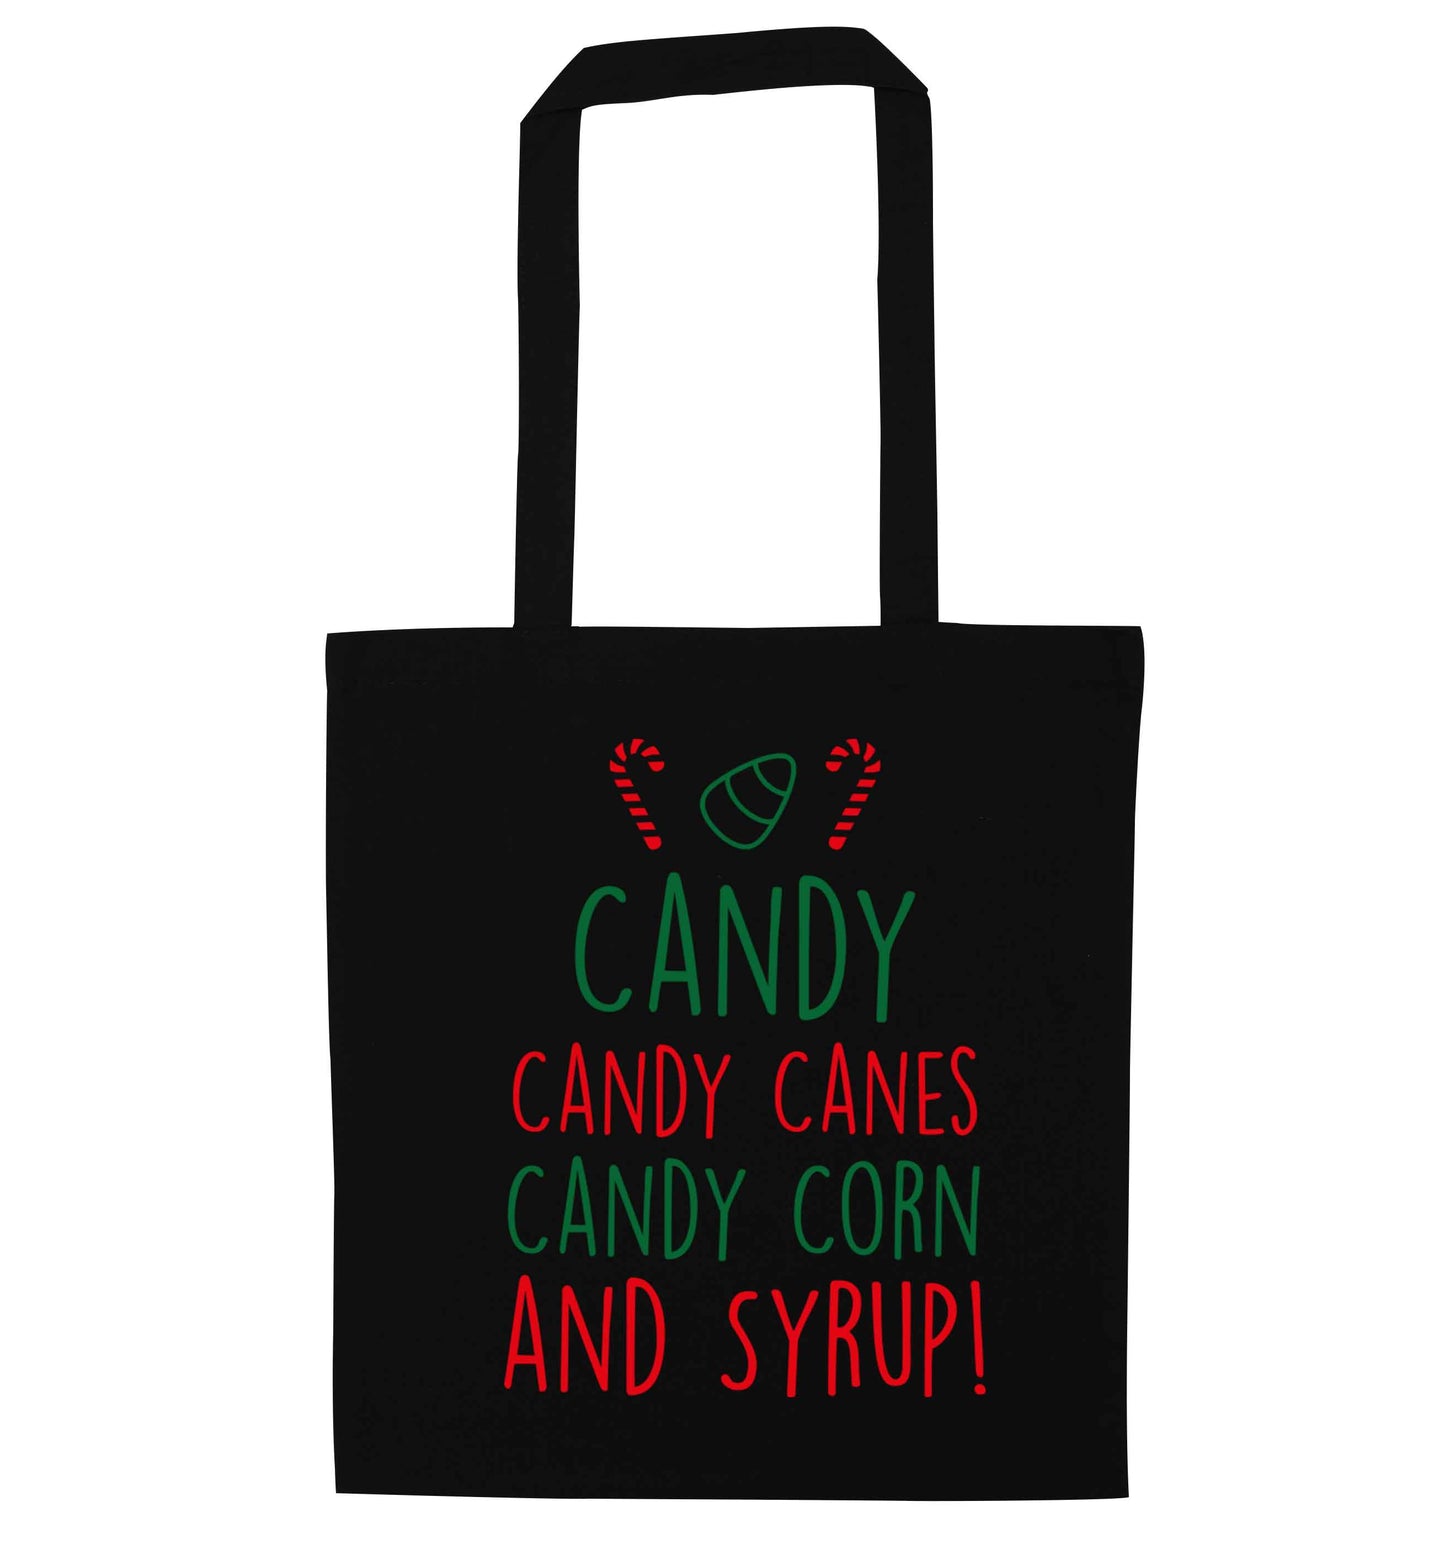 Candy Canes Candy Corns black tote bag